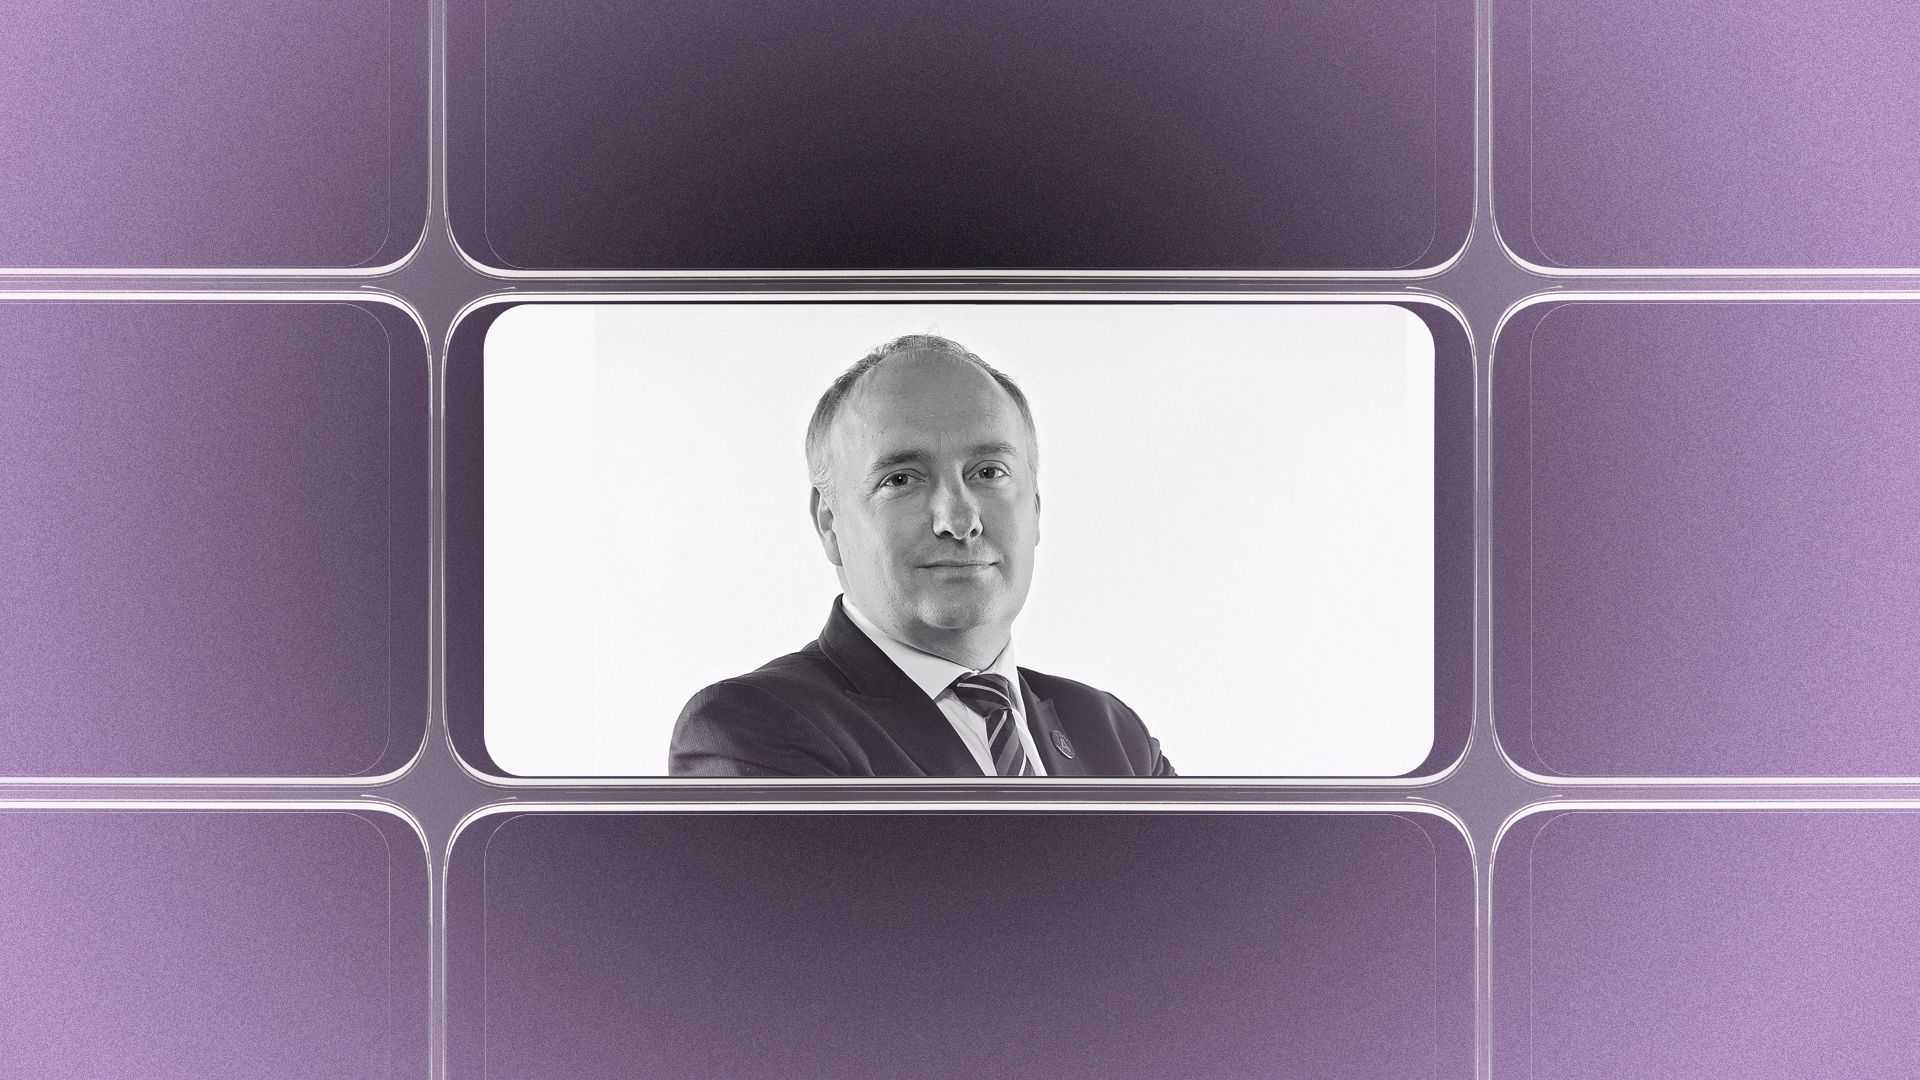 Photo illustration of a grid of smartphone screens, the center one showing an image of Darren Eales.